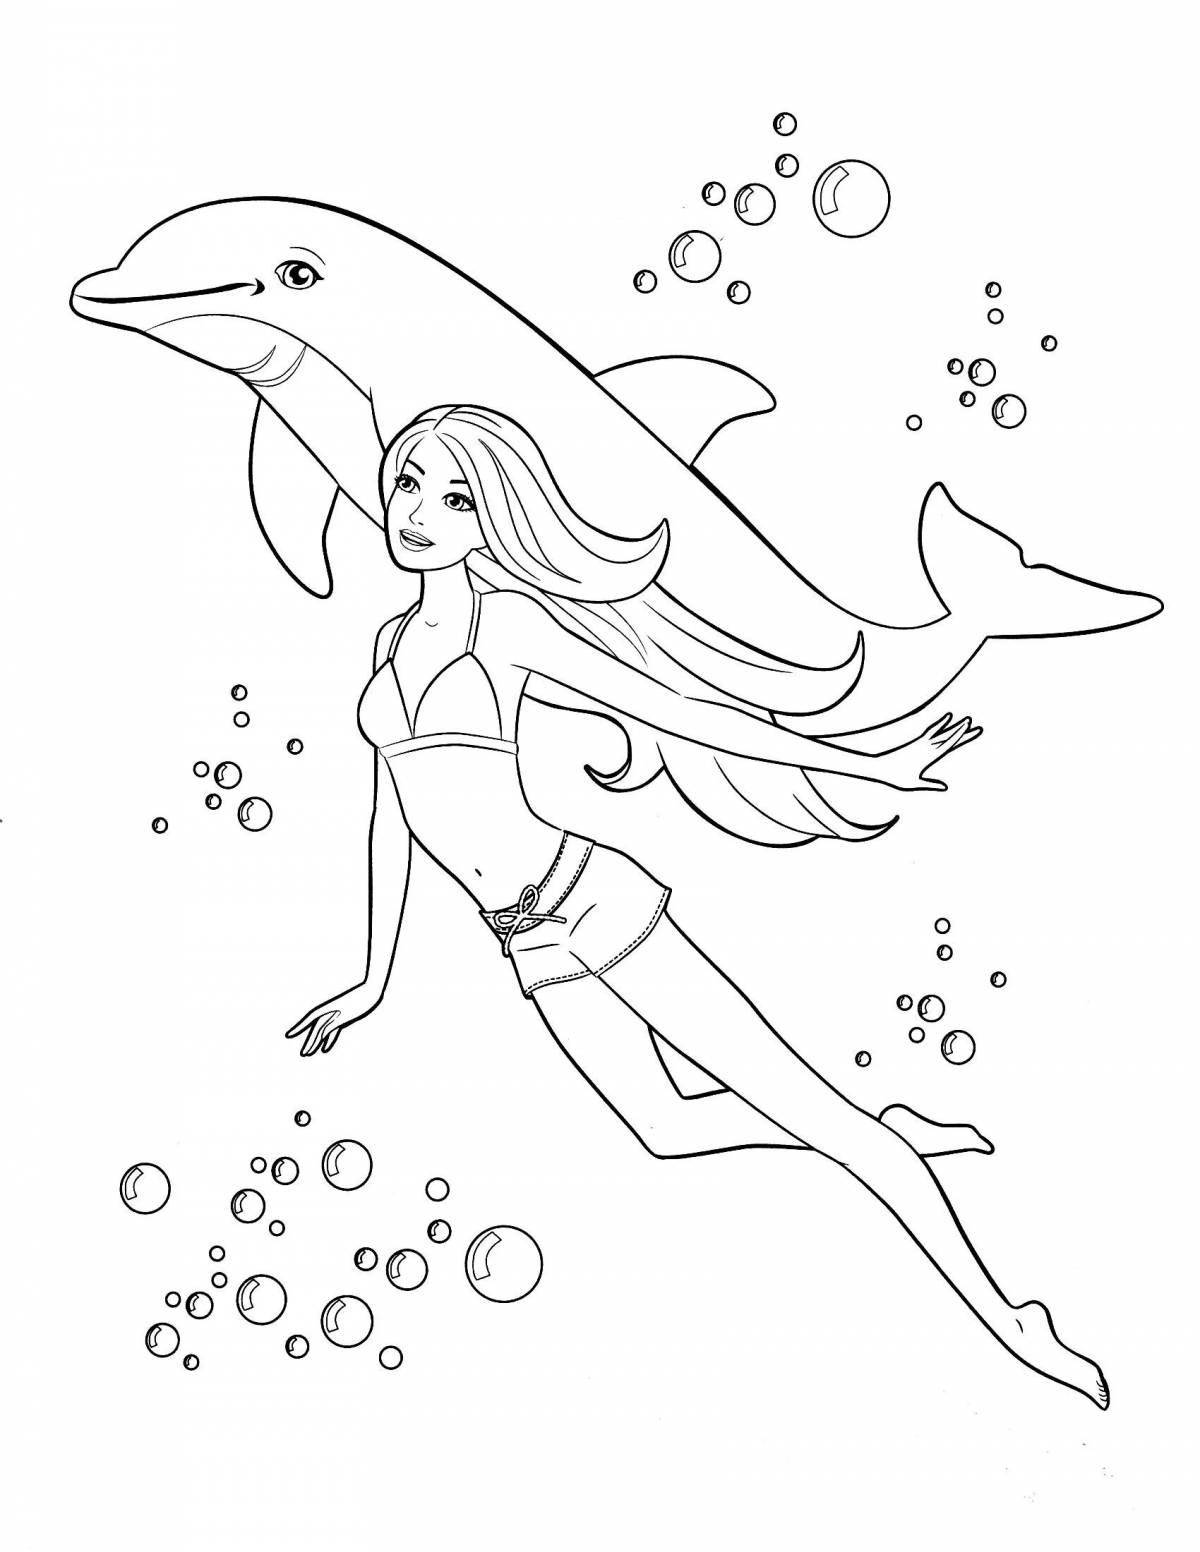 Coloring page elegant barbie in the sea